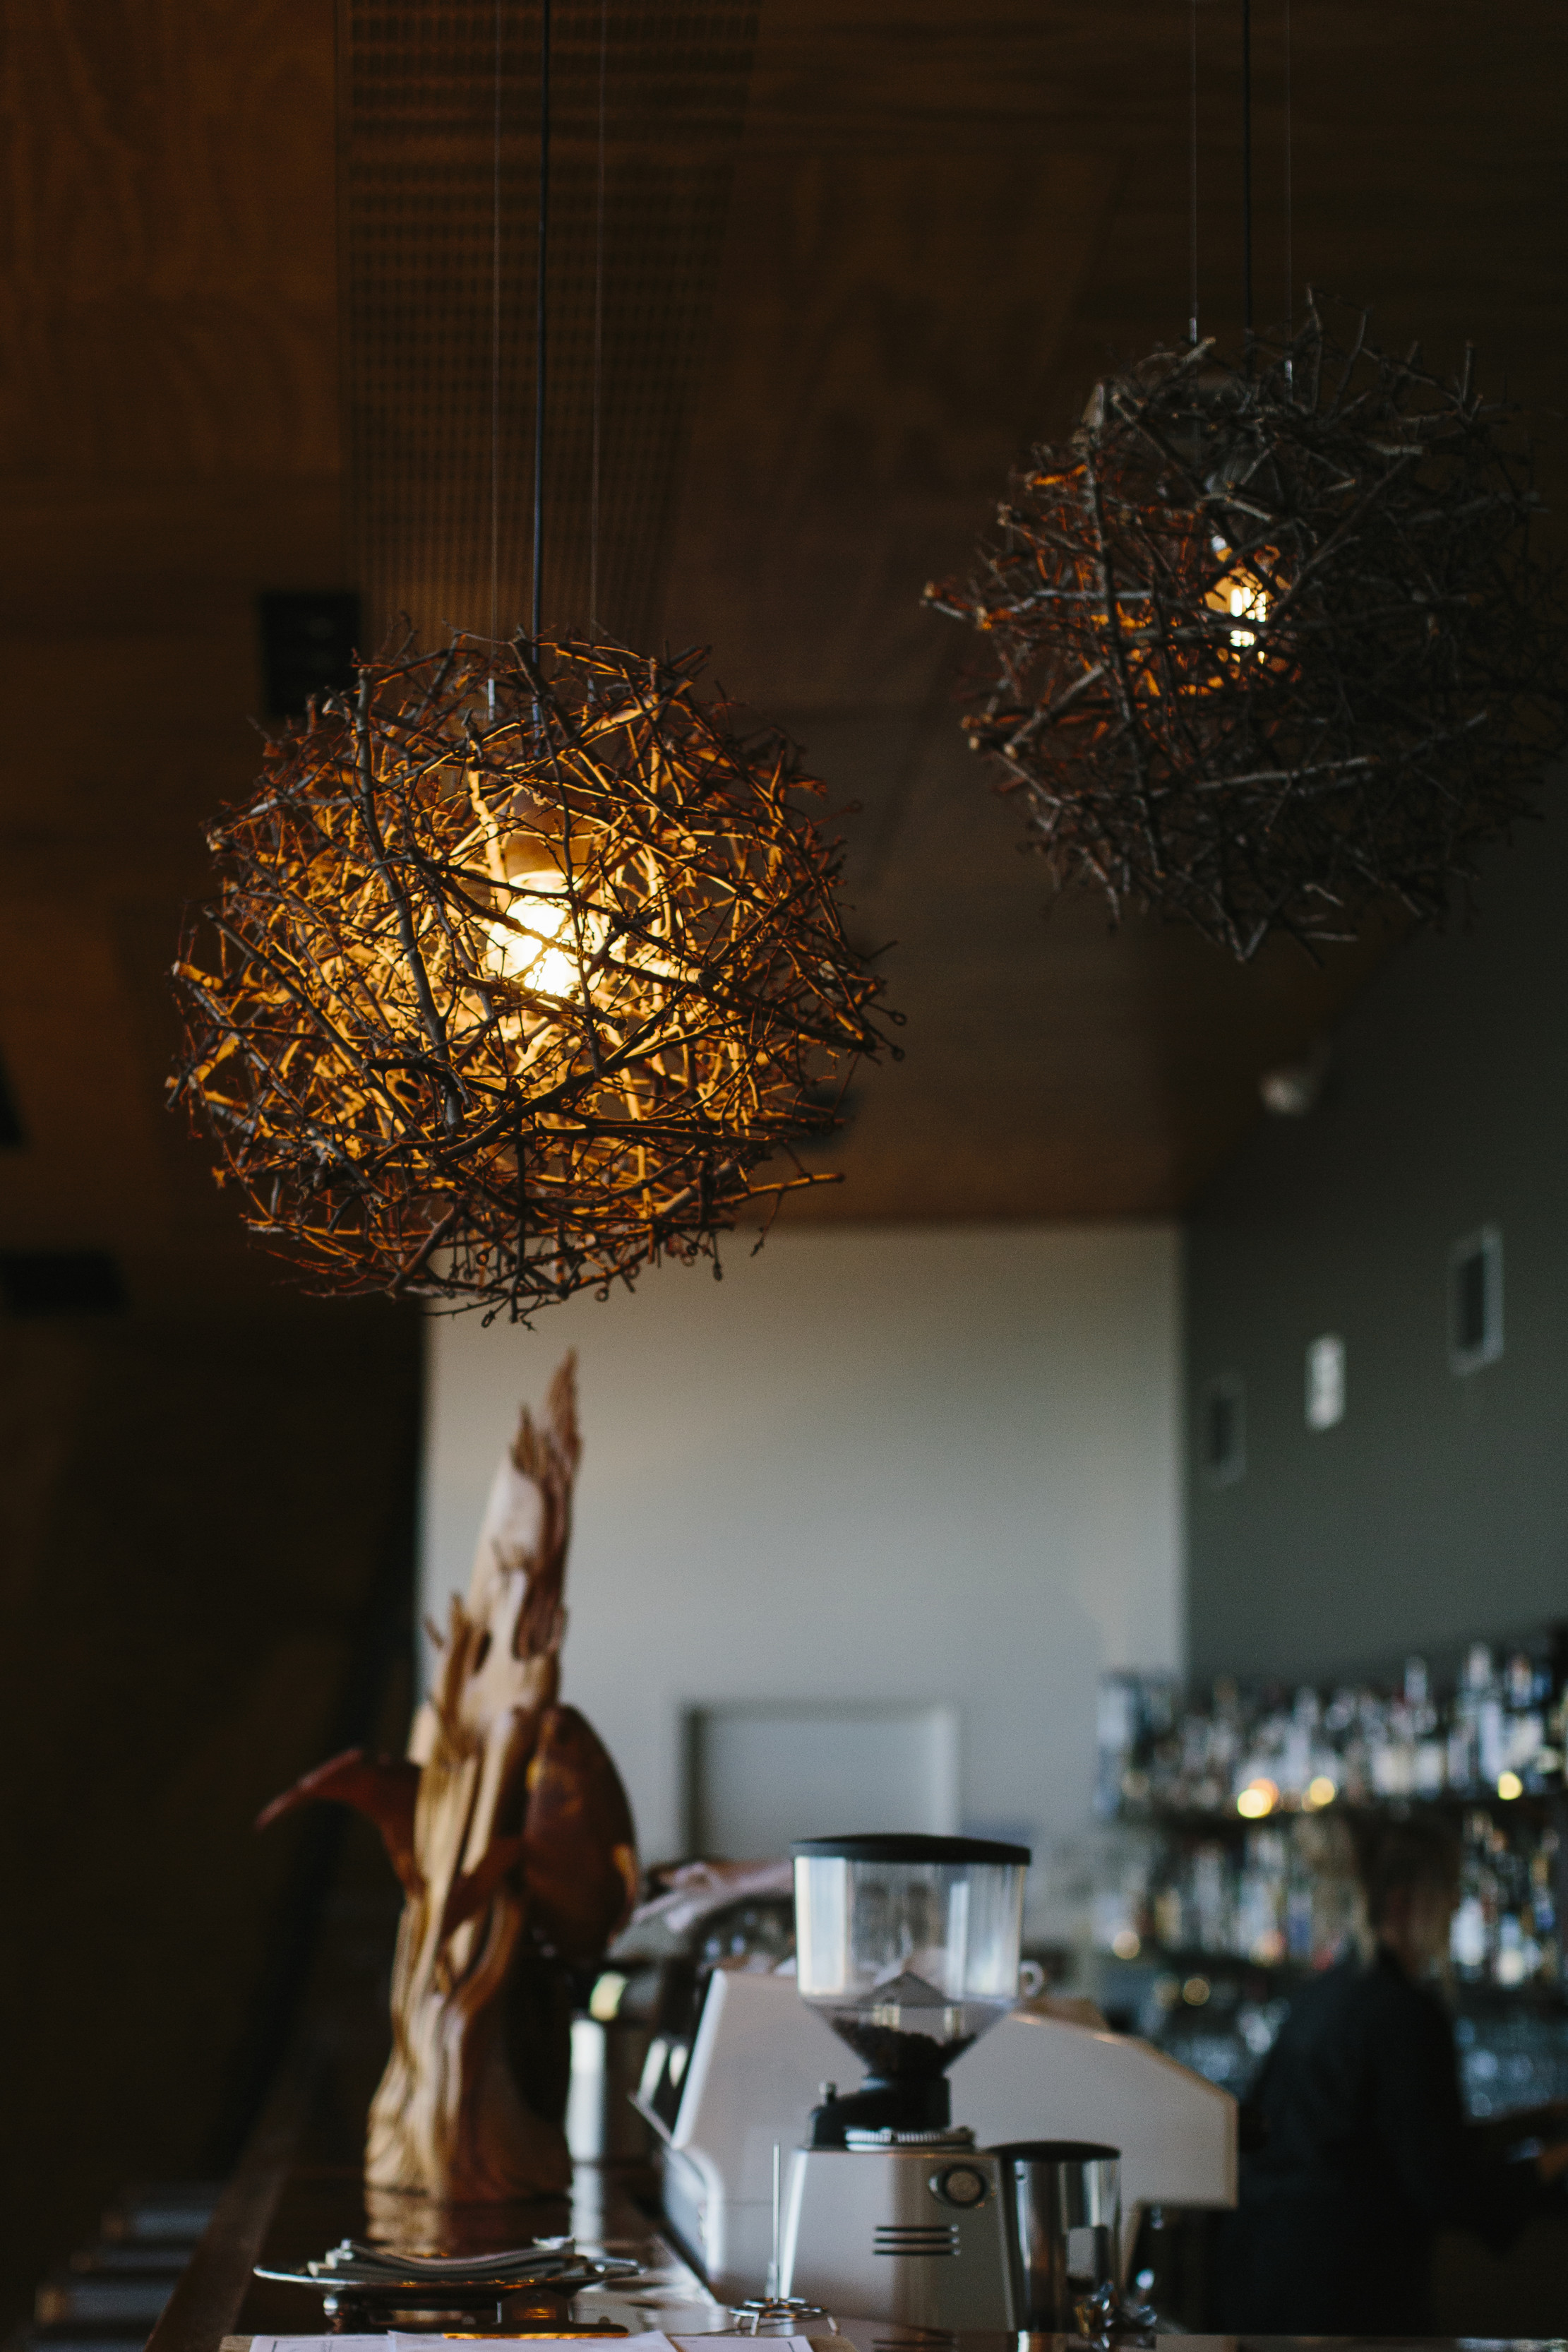 Image of rustic lights and bar at Mrs Jones restaurant bar lounge, located beachside at the Bluff on the second level above the Devonport Surf Club.